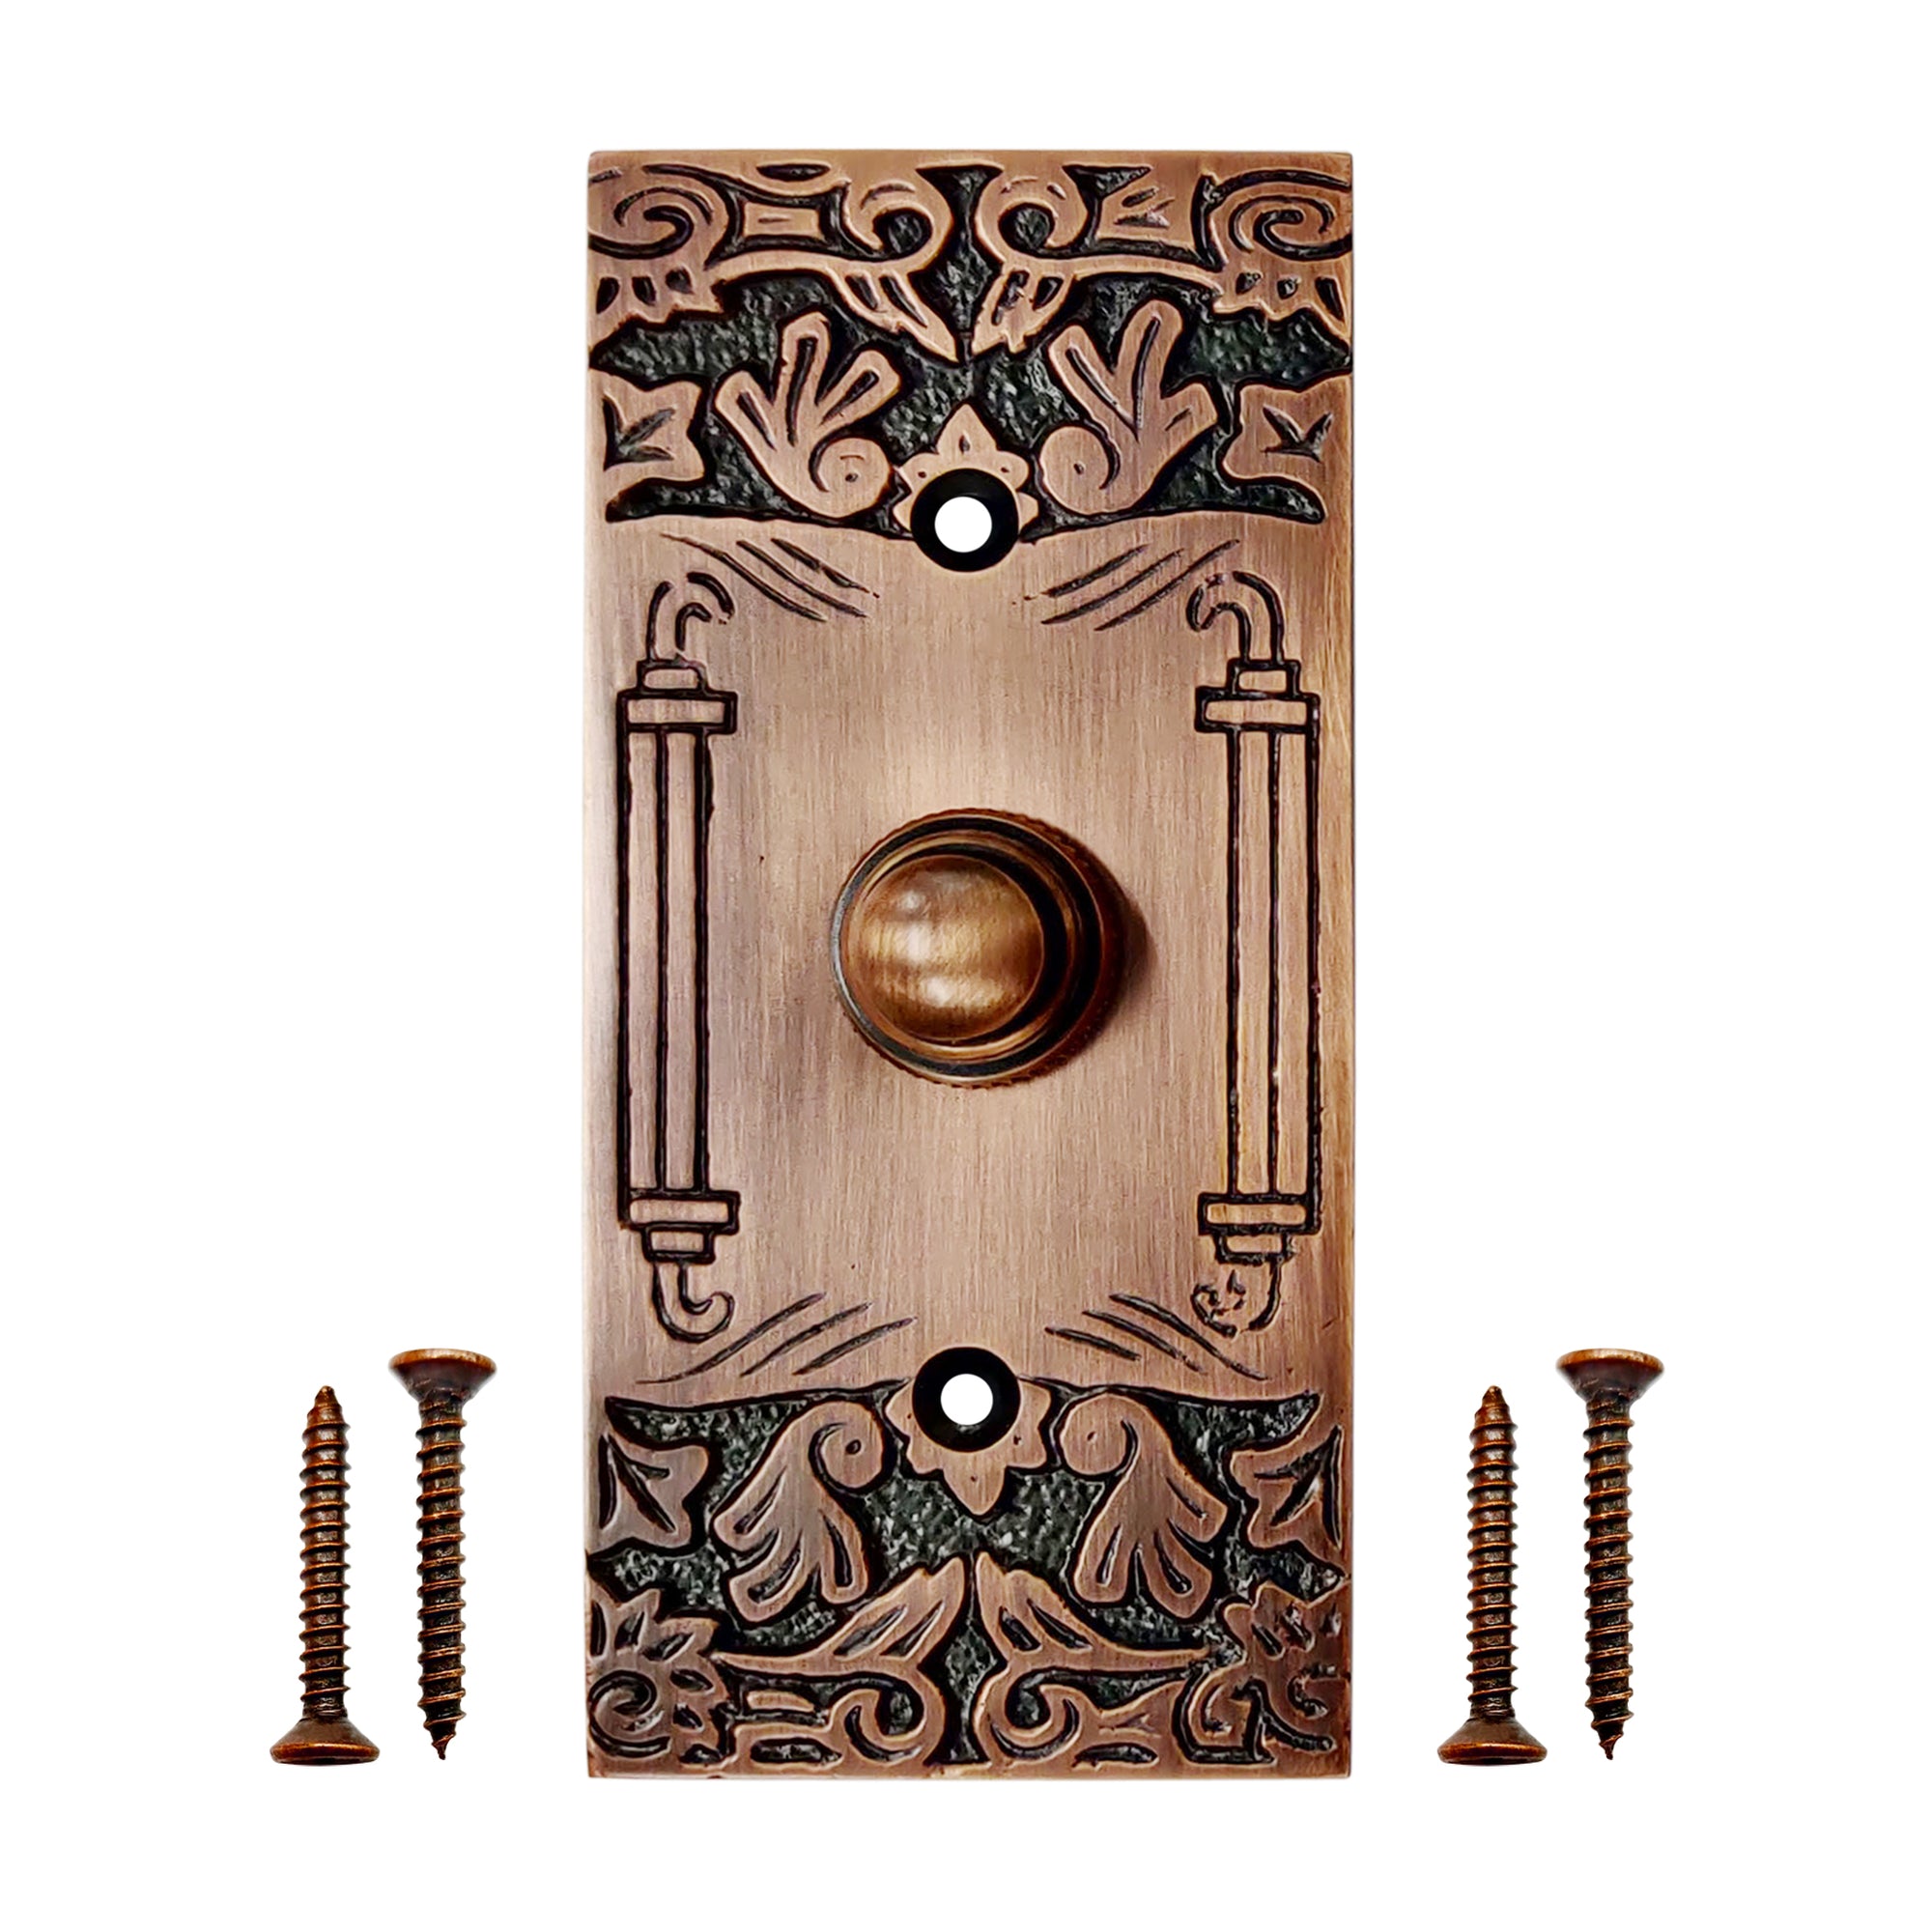 Decorative Doorbell Button – Finest Quality Bell Push Button – Easy to Install Calling Bell Button – Antique Copper